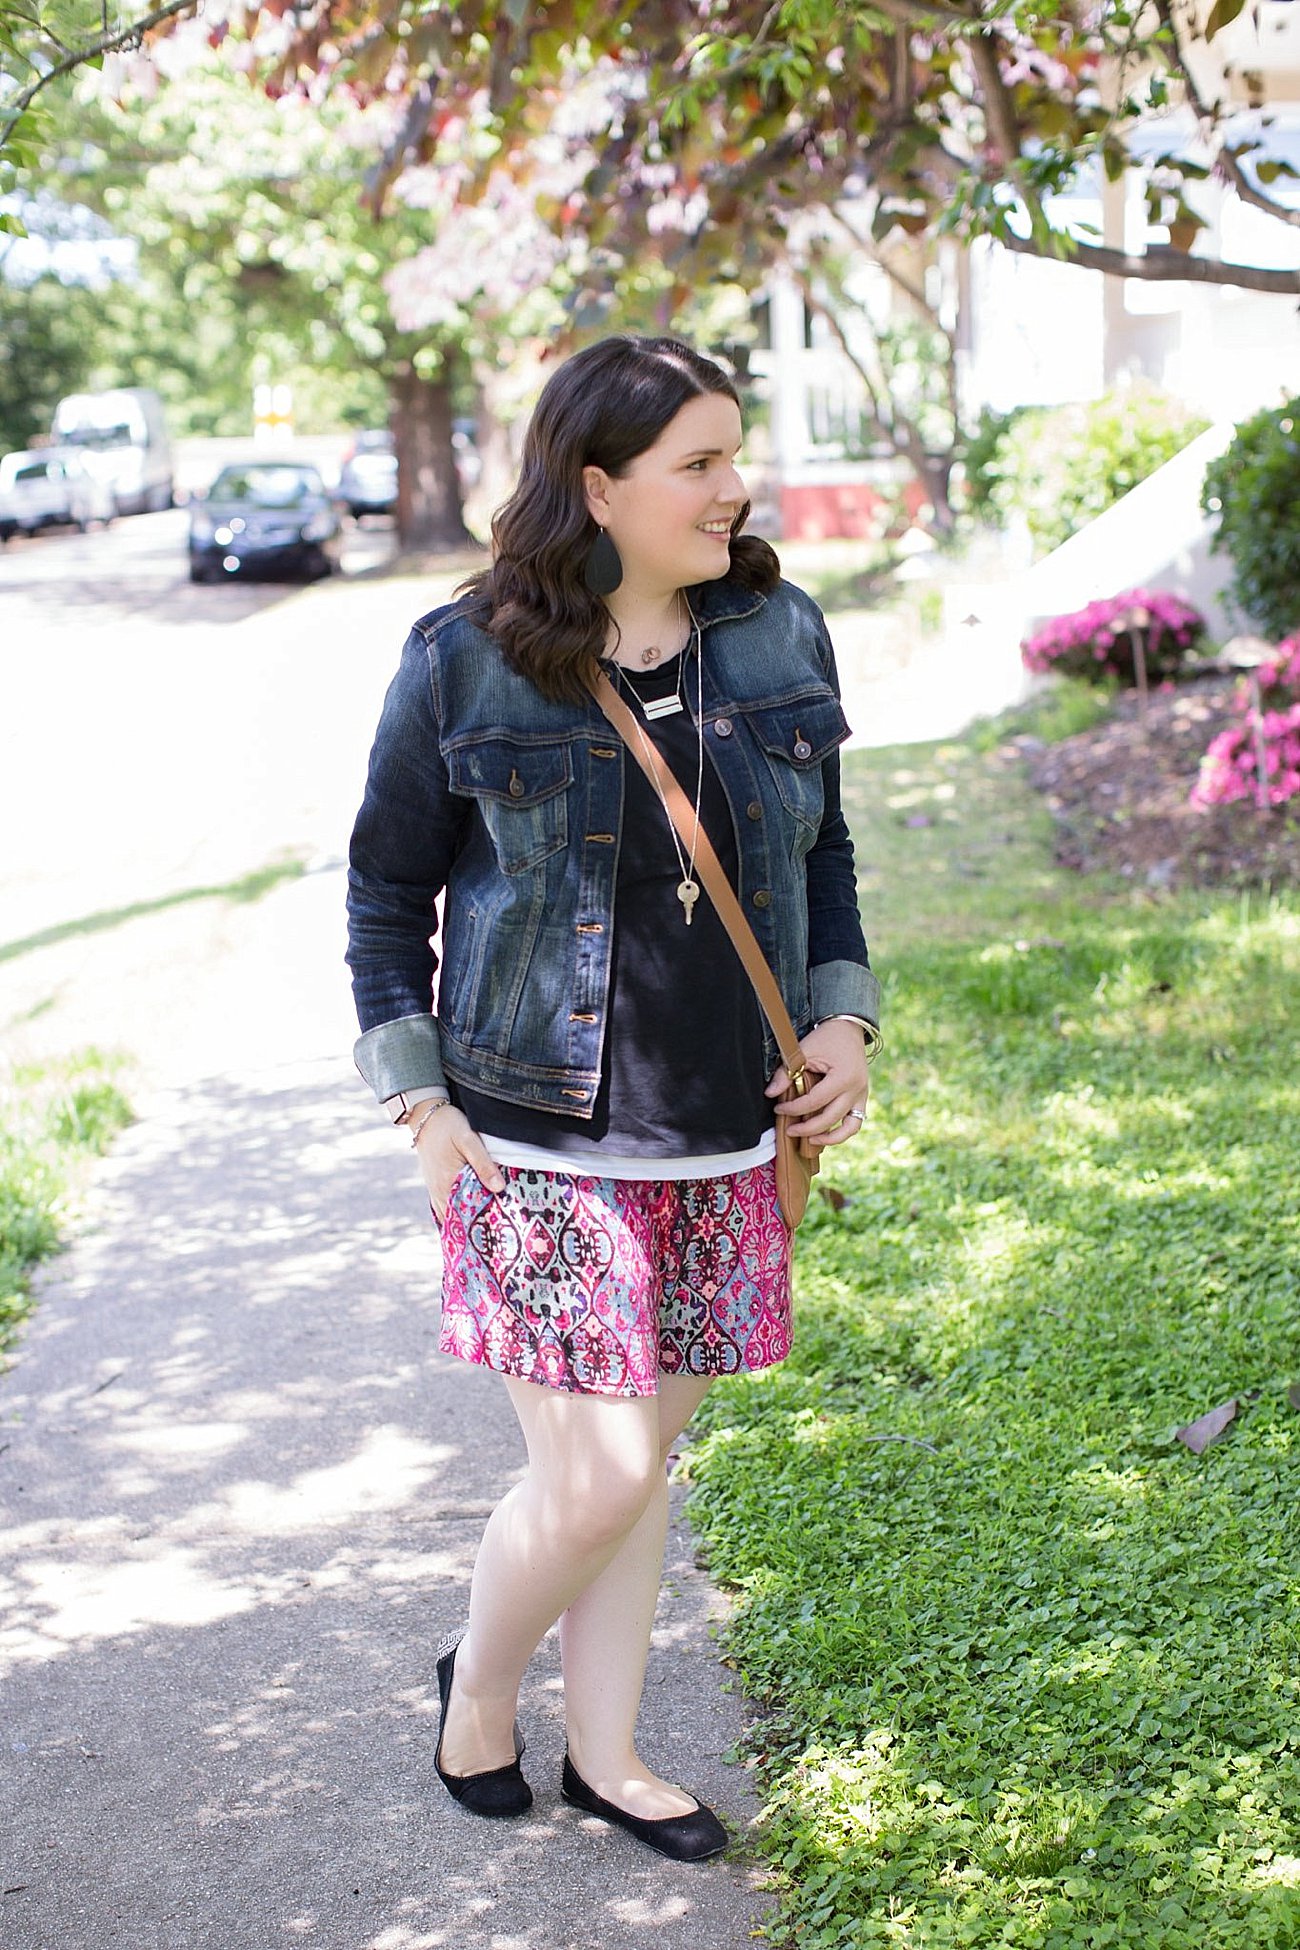 Threads 4 Thought Mona Skort, Stitch Fix Just USA Denim Jacket, Sudara Goods Globetrotter Tee, Sseko Designs Foldover Crossbody Clutch, The Root Collective shoes | Ethical Fashion & Style Blogger (2)